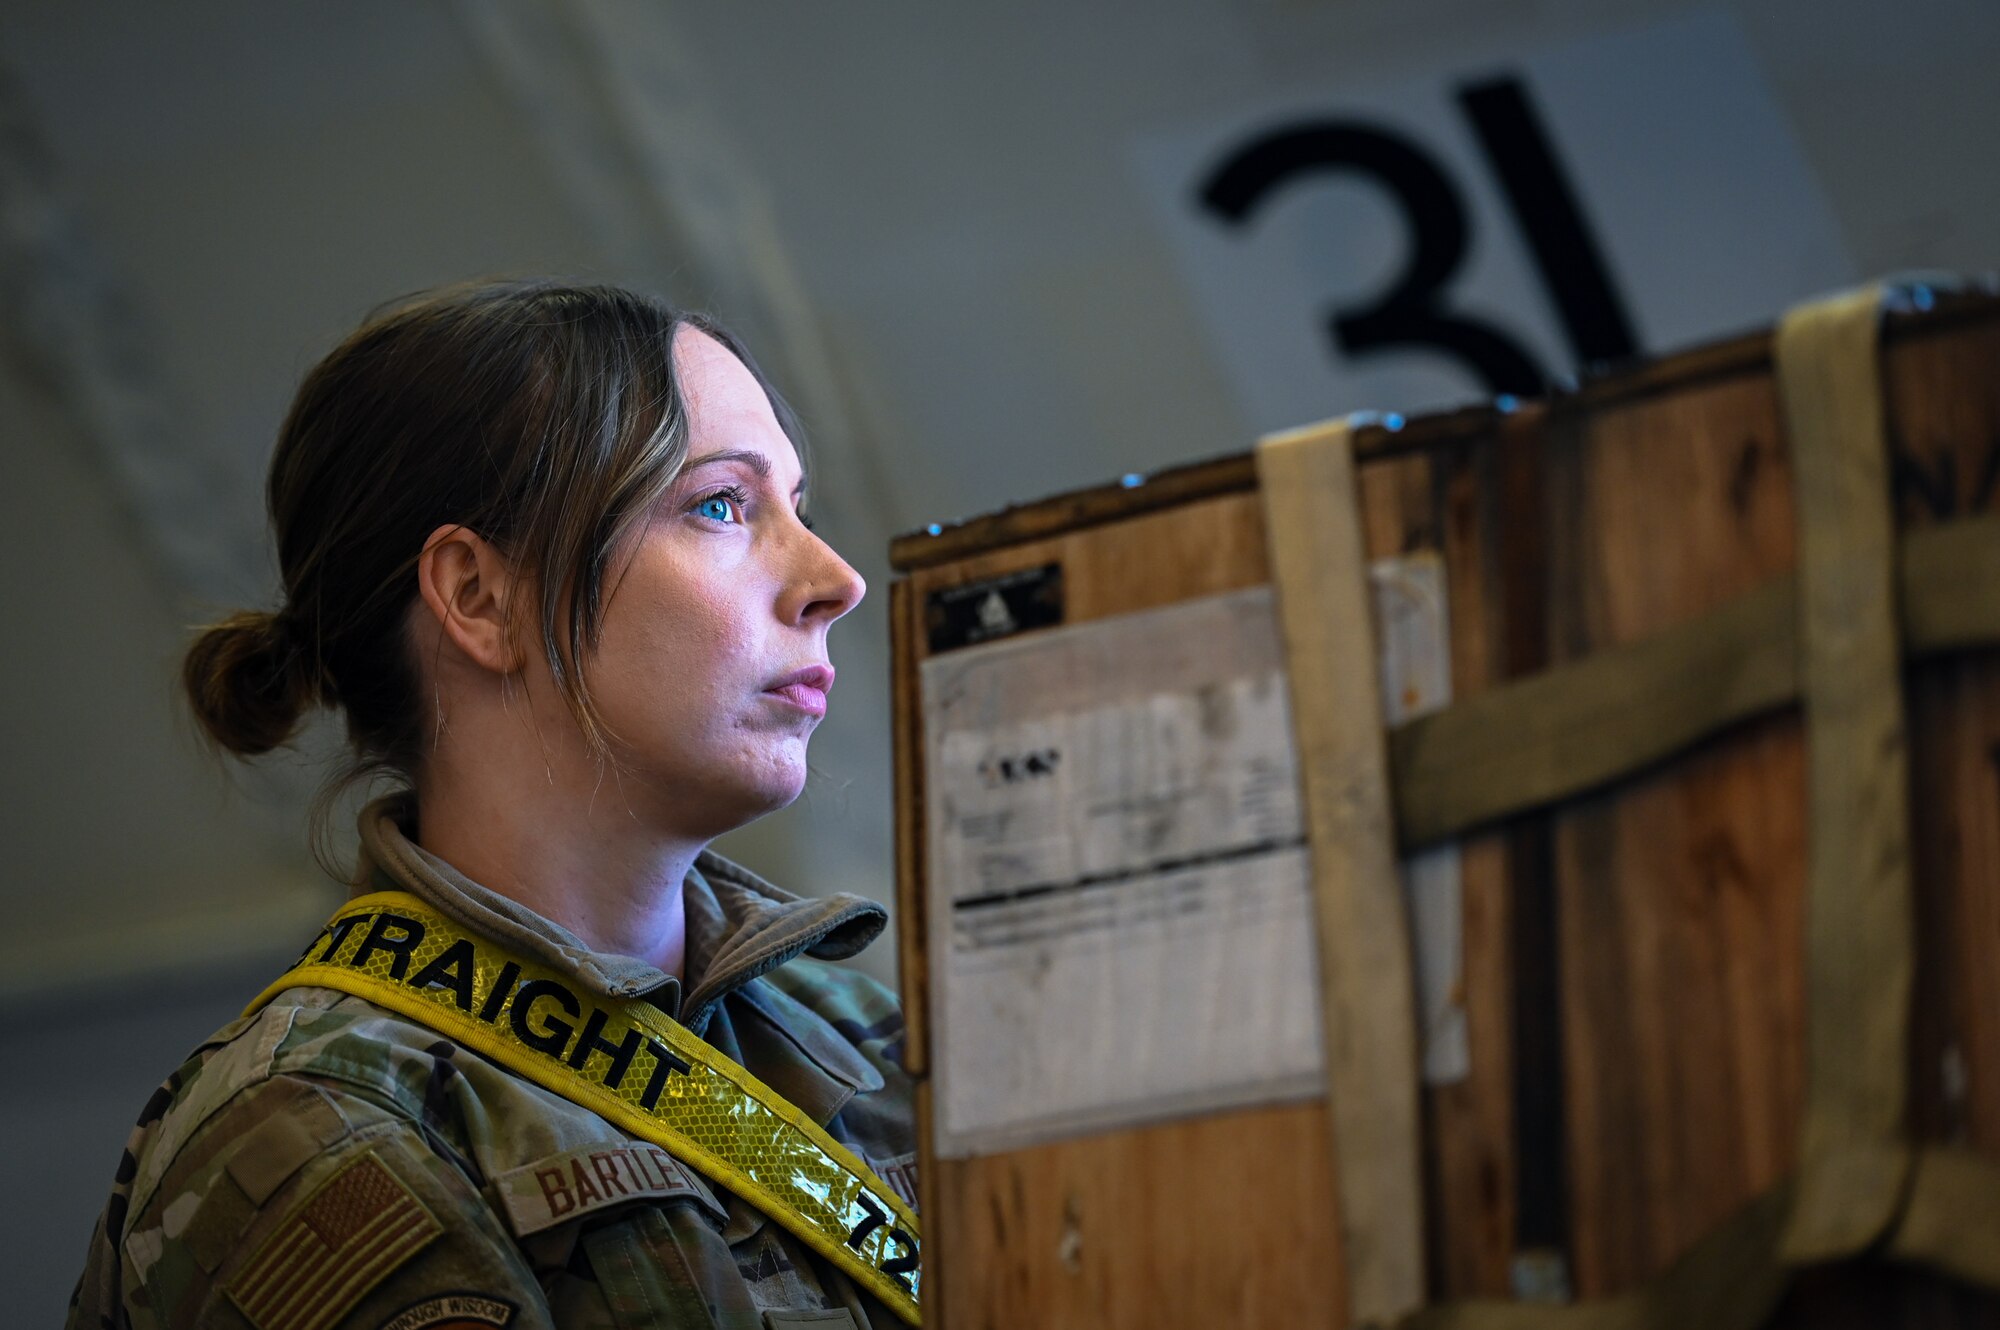 Airman 1st Class Kaylan Bartlett, an aircraft services technician assigned to the 728th Air Mobility Squadron, prepares to unload medical shelters and equipment at Incirlik Air Base, Türkiye, Feb. 18, 2023.